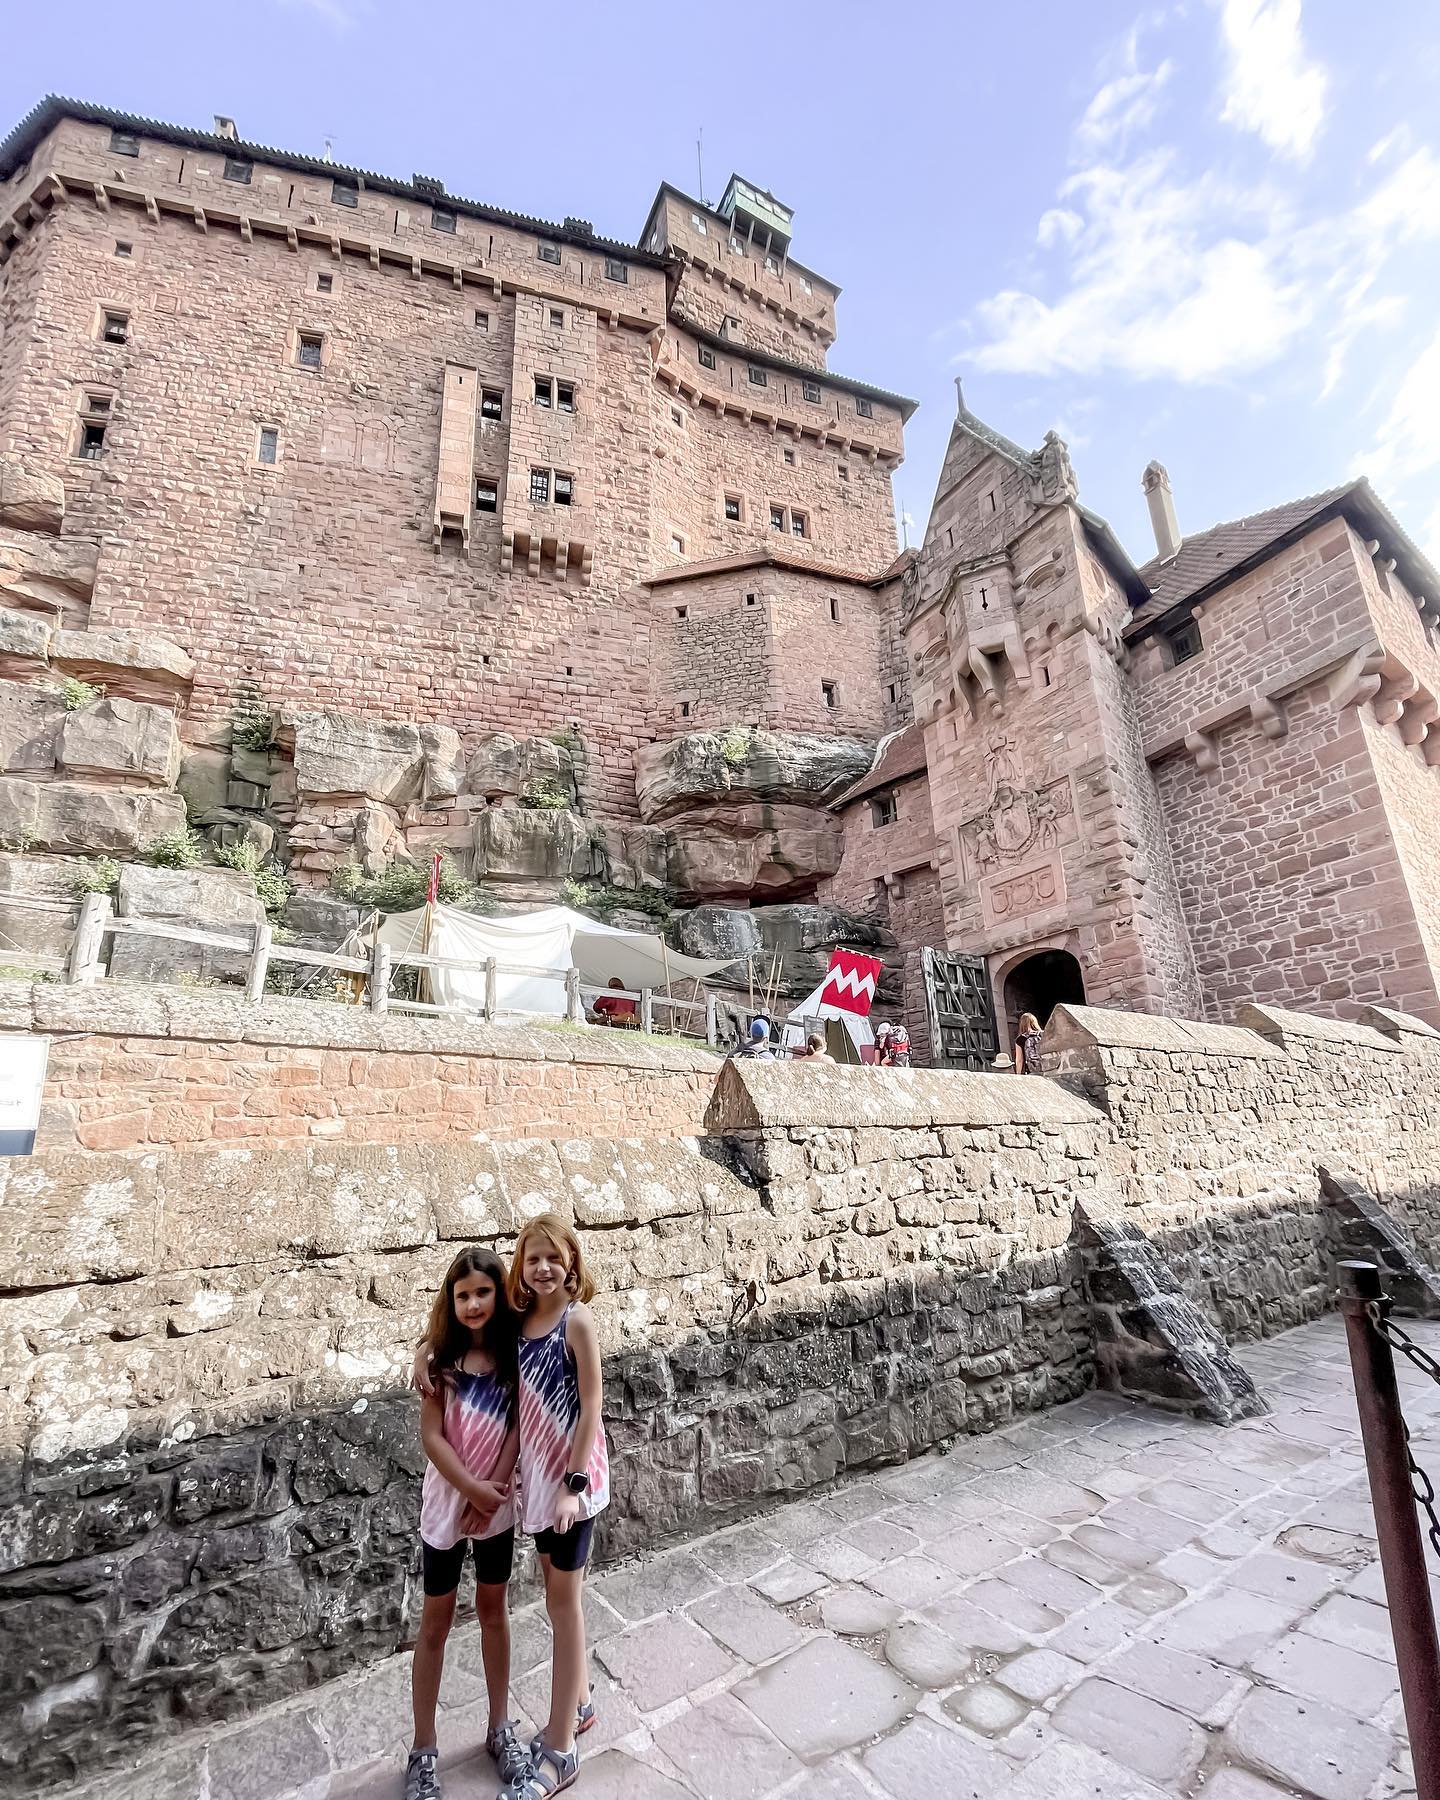 Haut-Koenigsbourg - 10 Exciting Day Trips from Basel!
